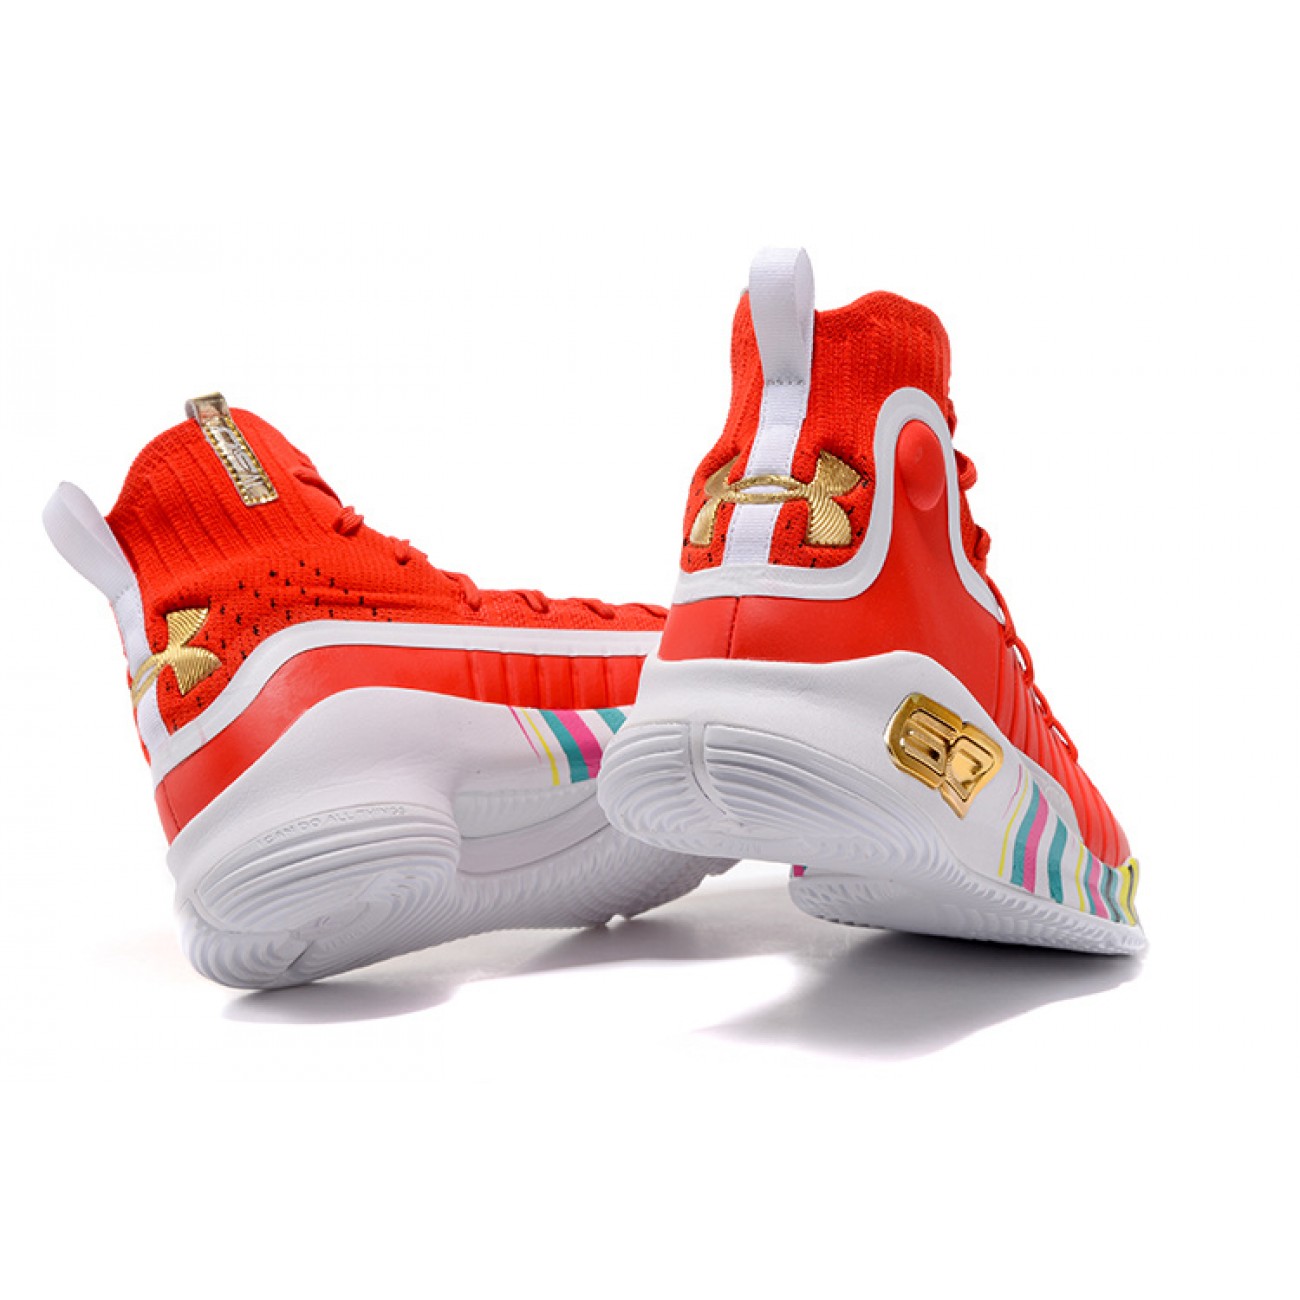 Under Armour UA Curry 4 "The Year of Rooster" Red/Gold